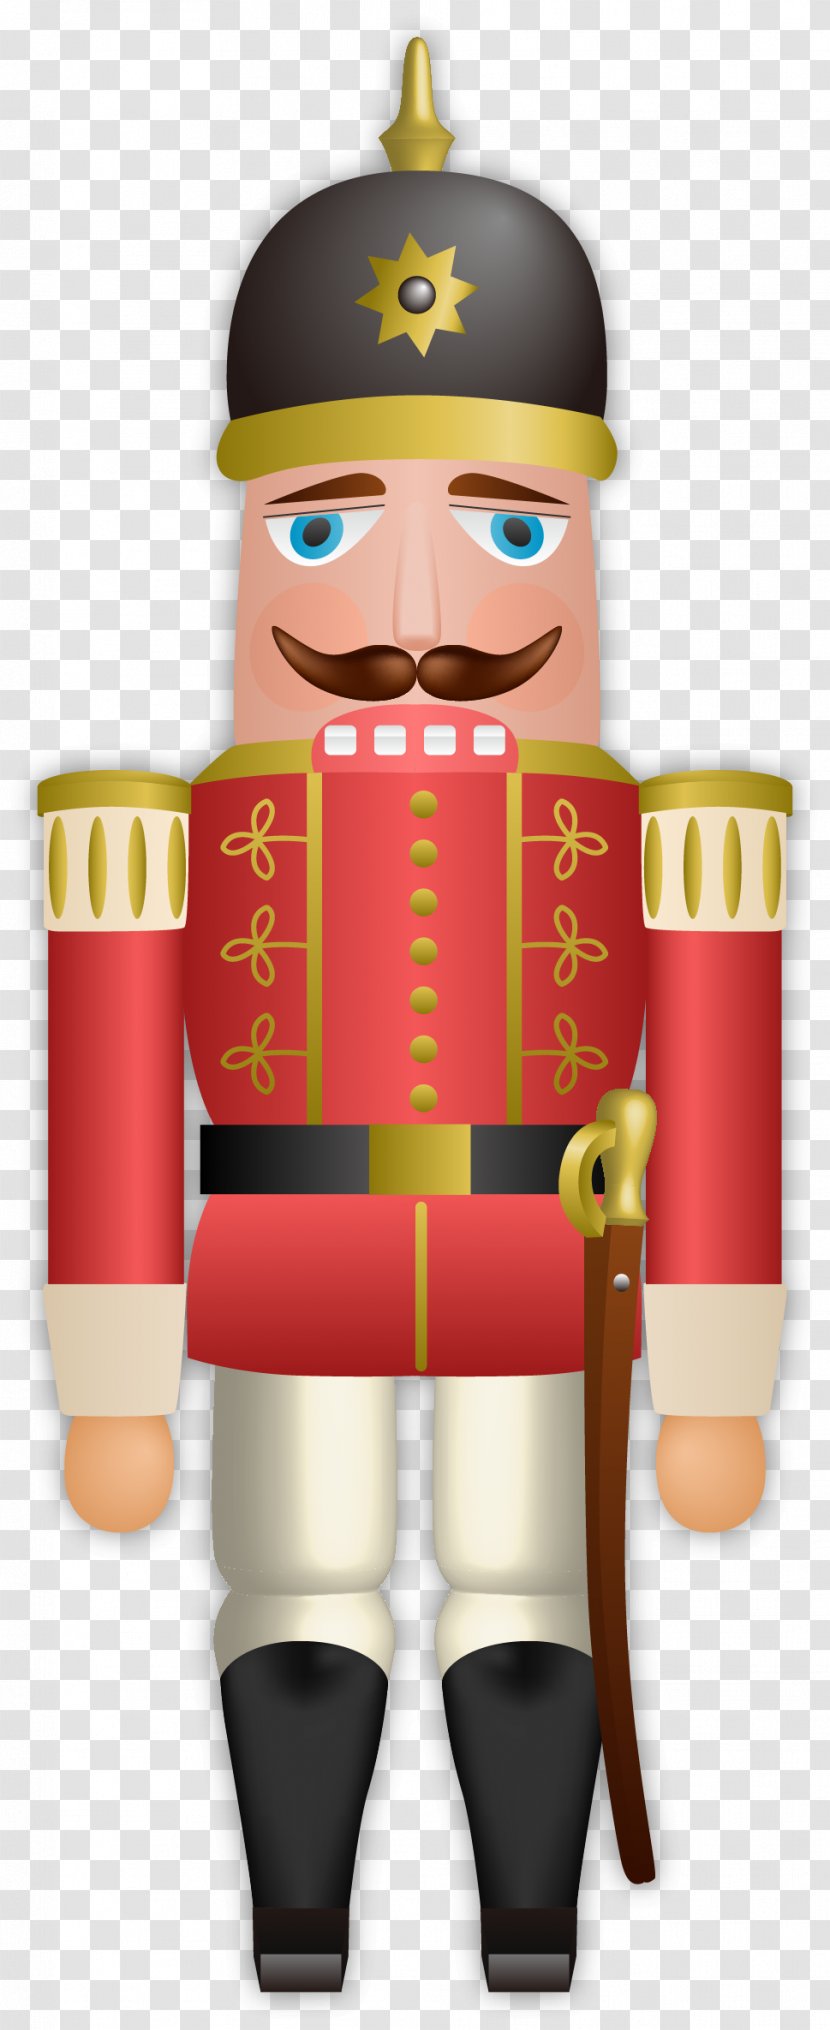 Toy Soldier Euclidean Vector - Designer - Hand Painted Soldiers Transparent PNG